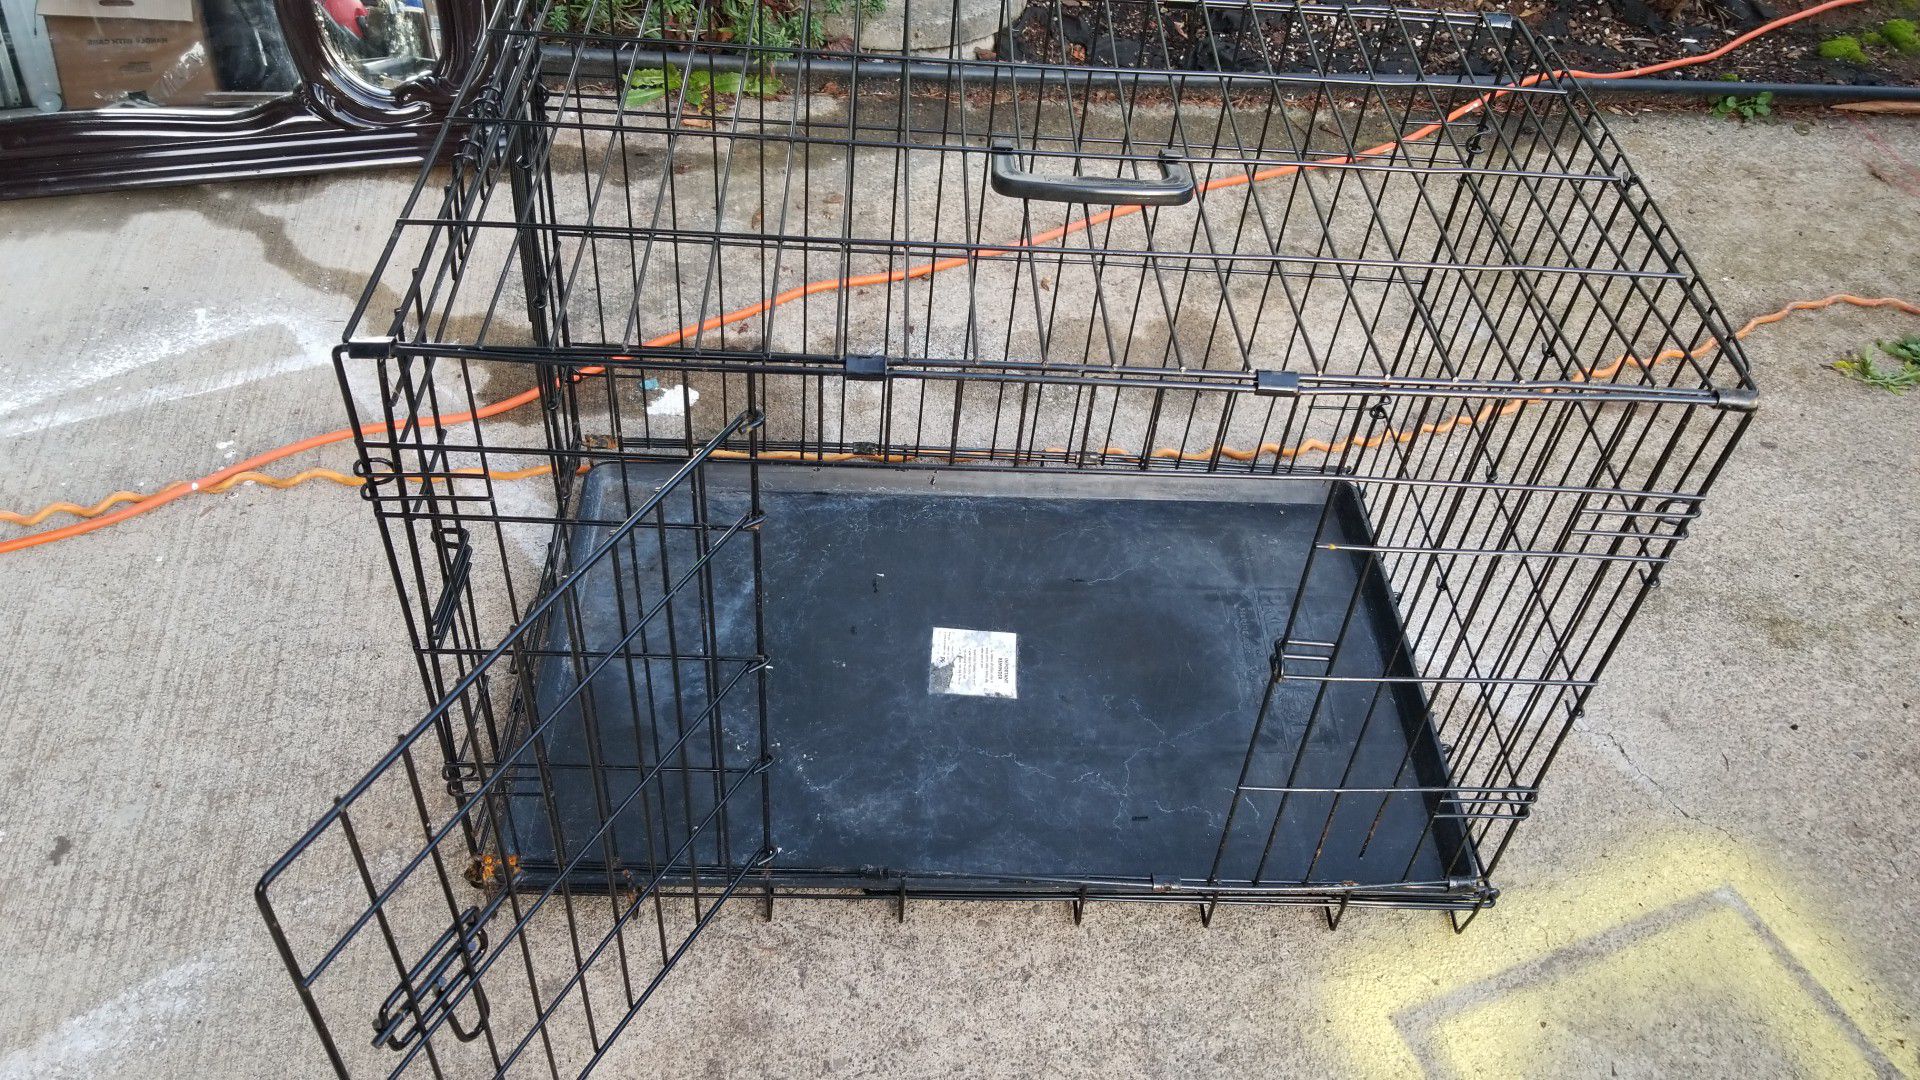 Crate for small size dog under 20 lbs